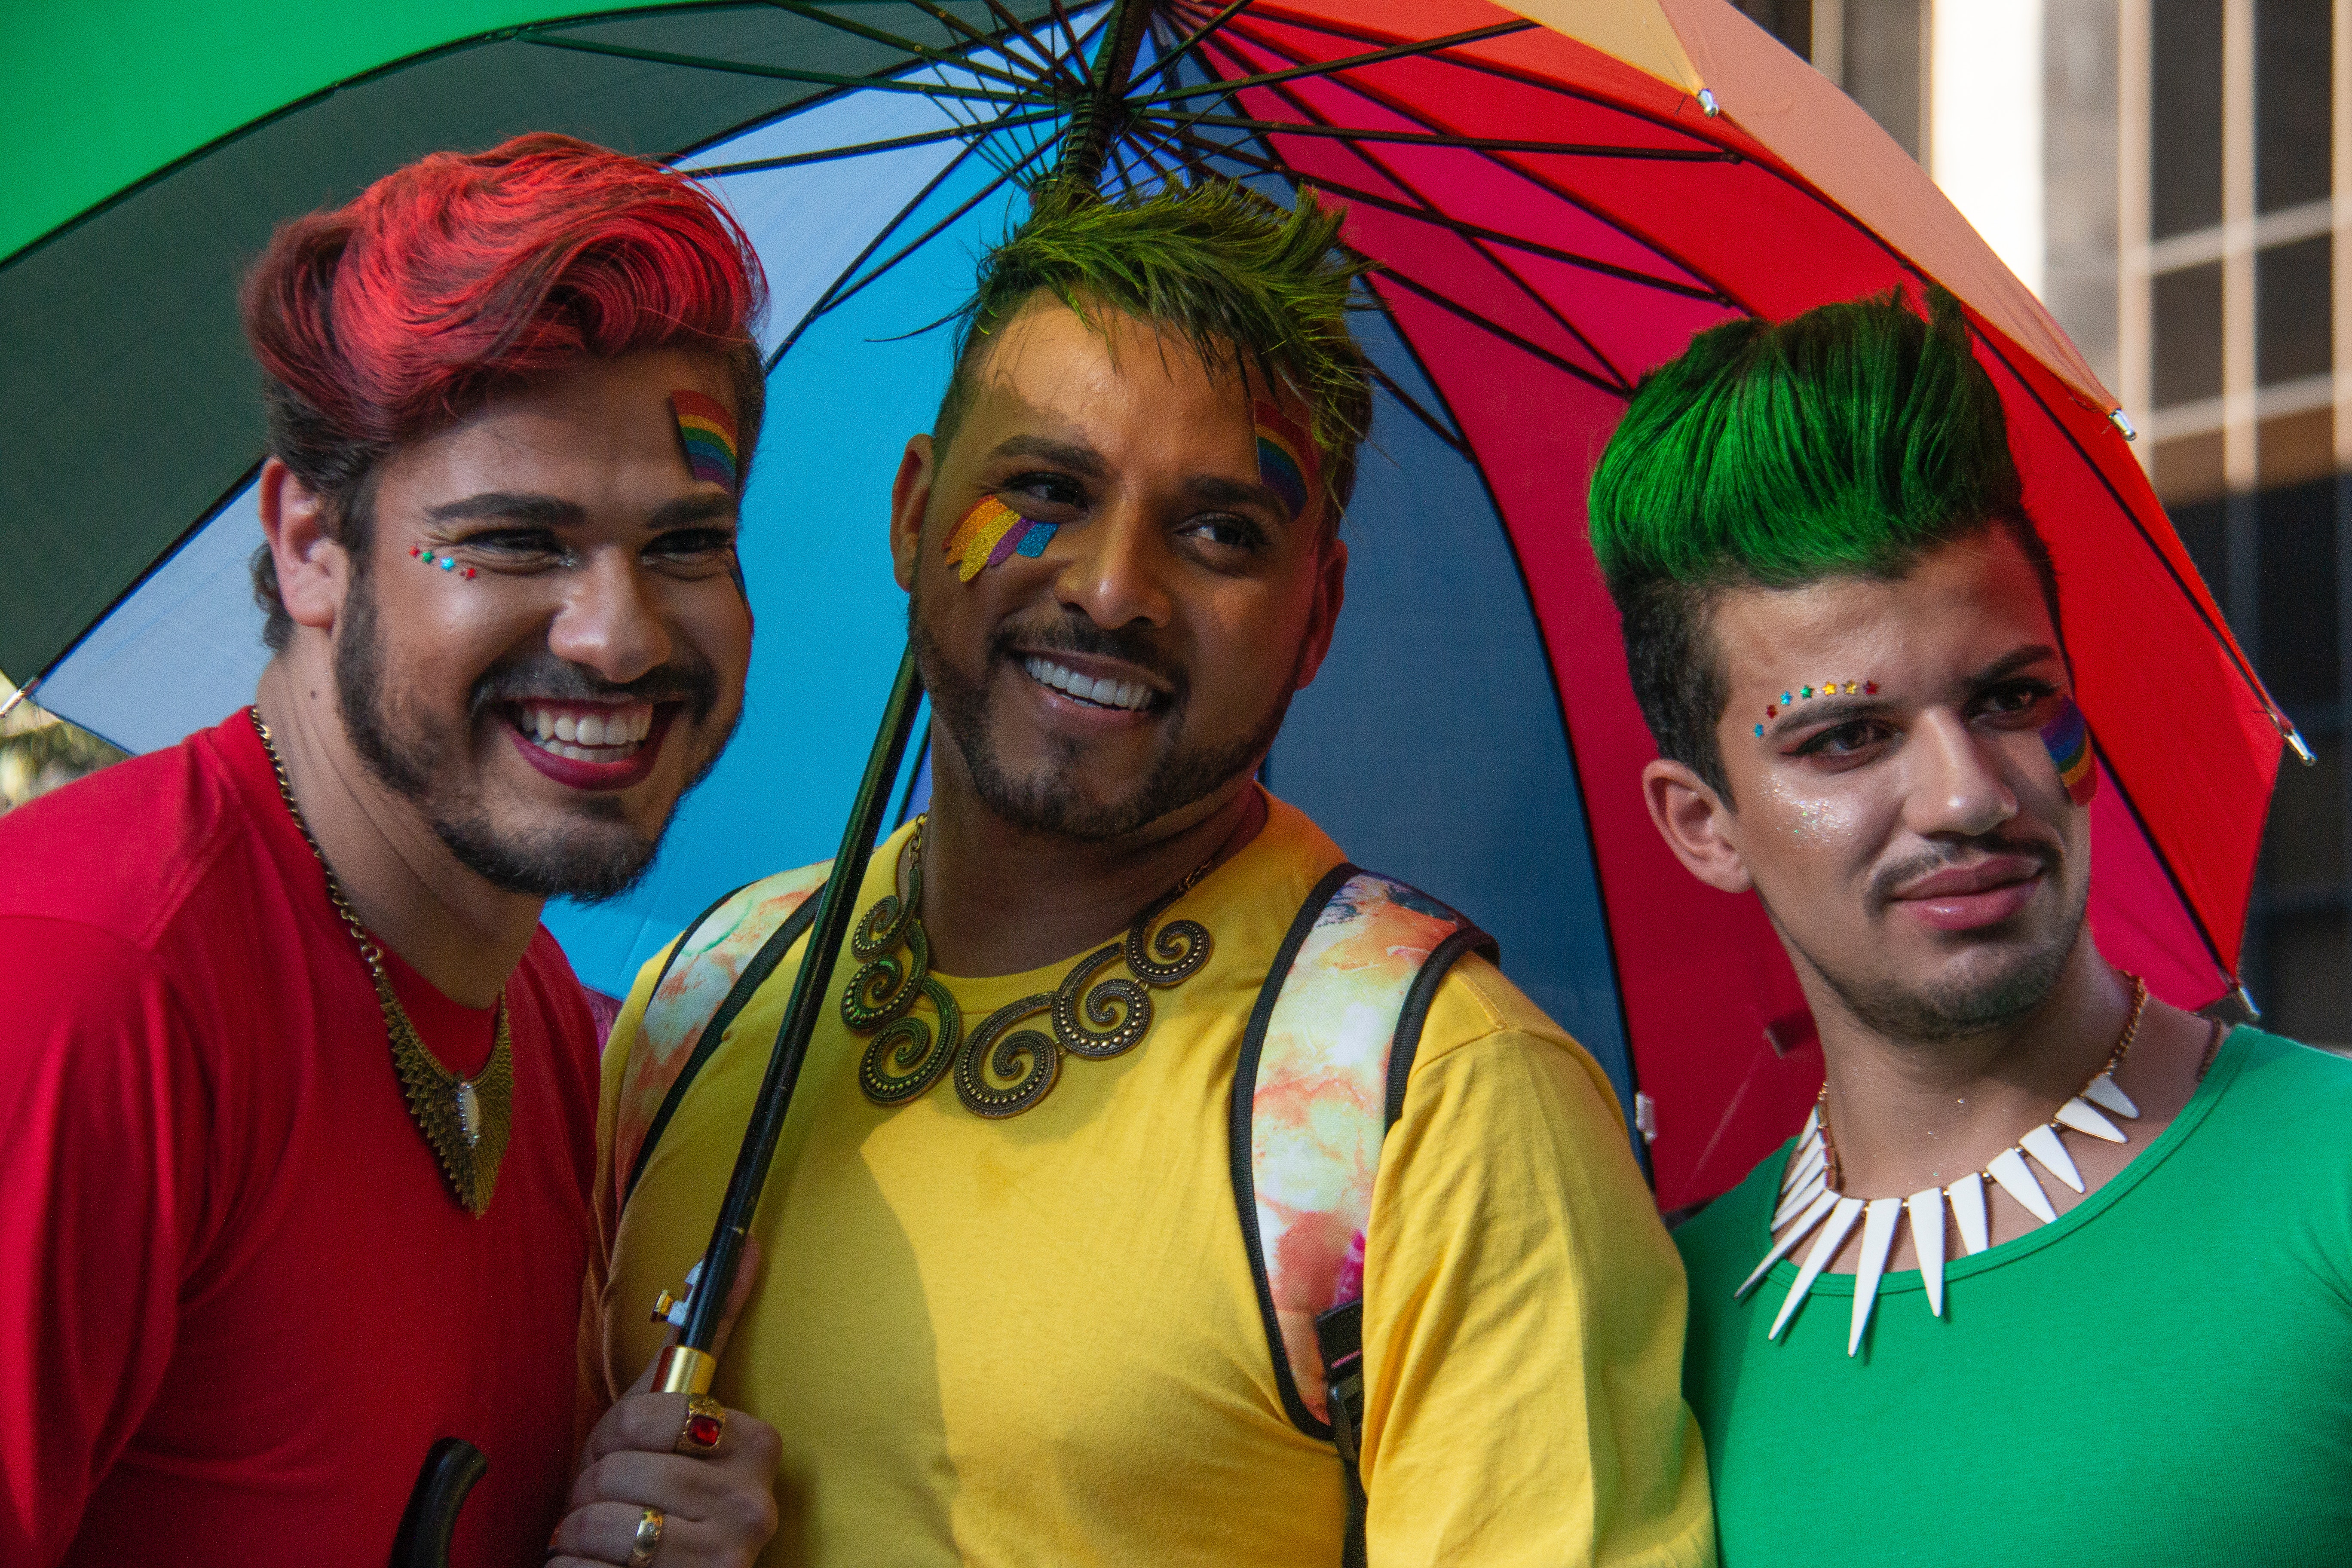 3 friends pose smiling for a picture during a pride event. They have dyed hair and colorful makeup.